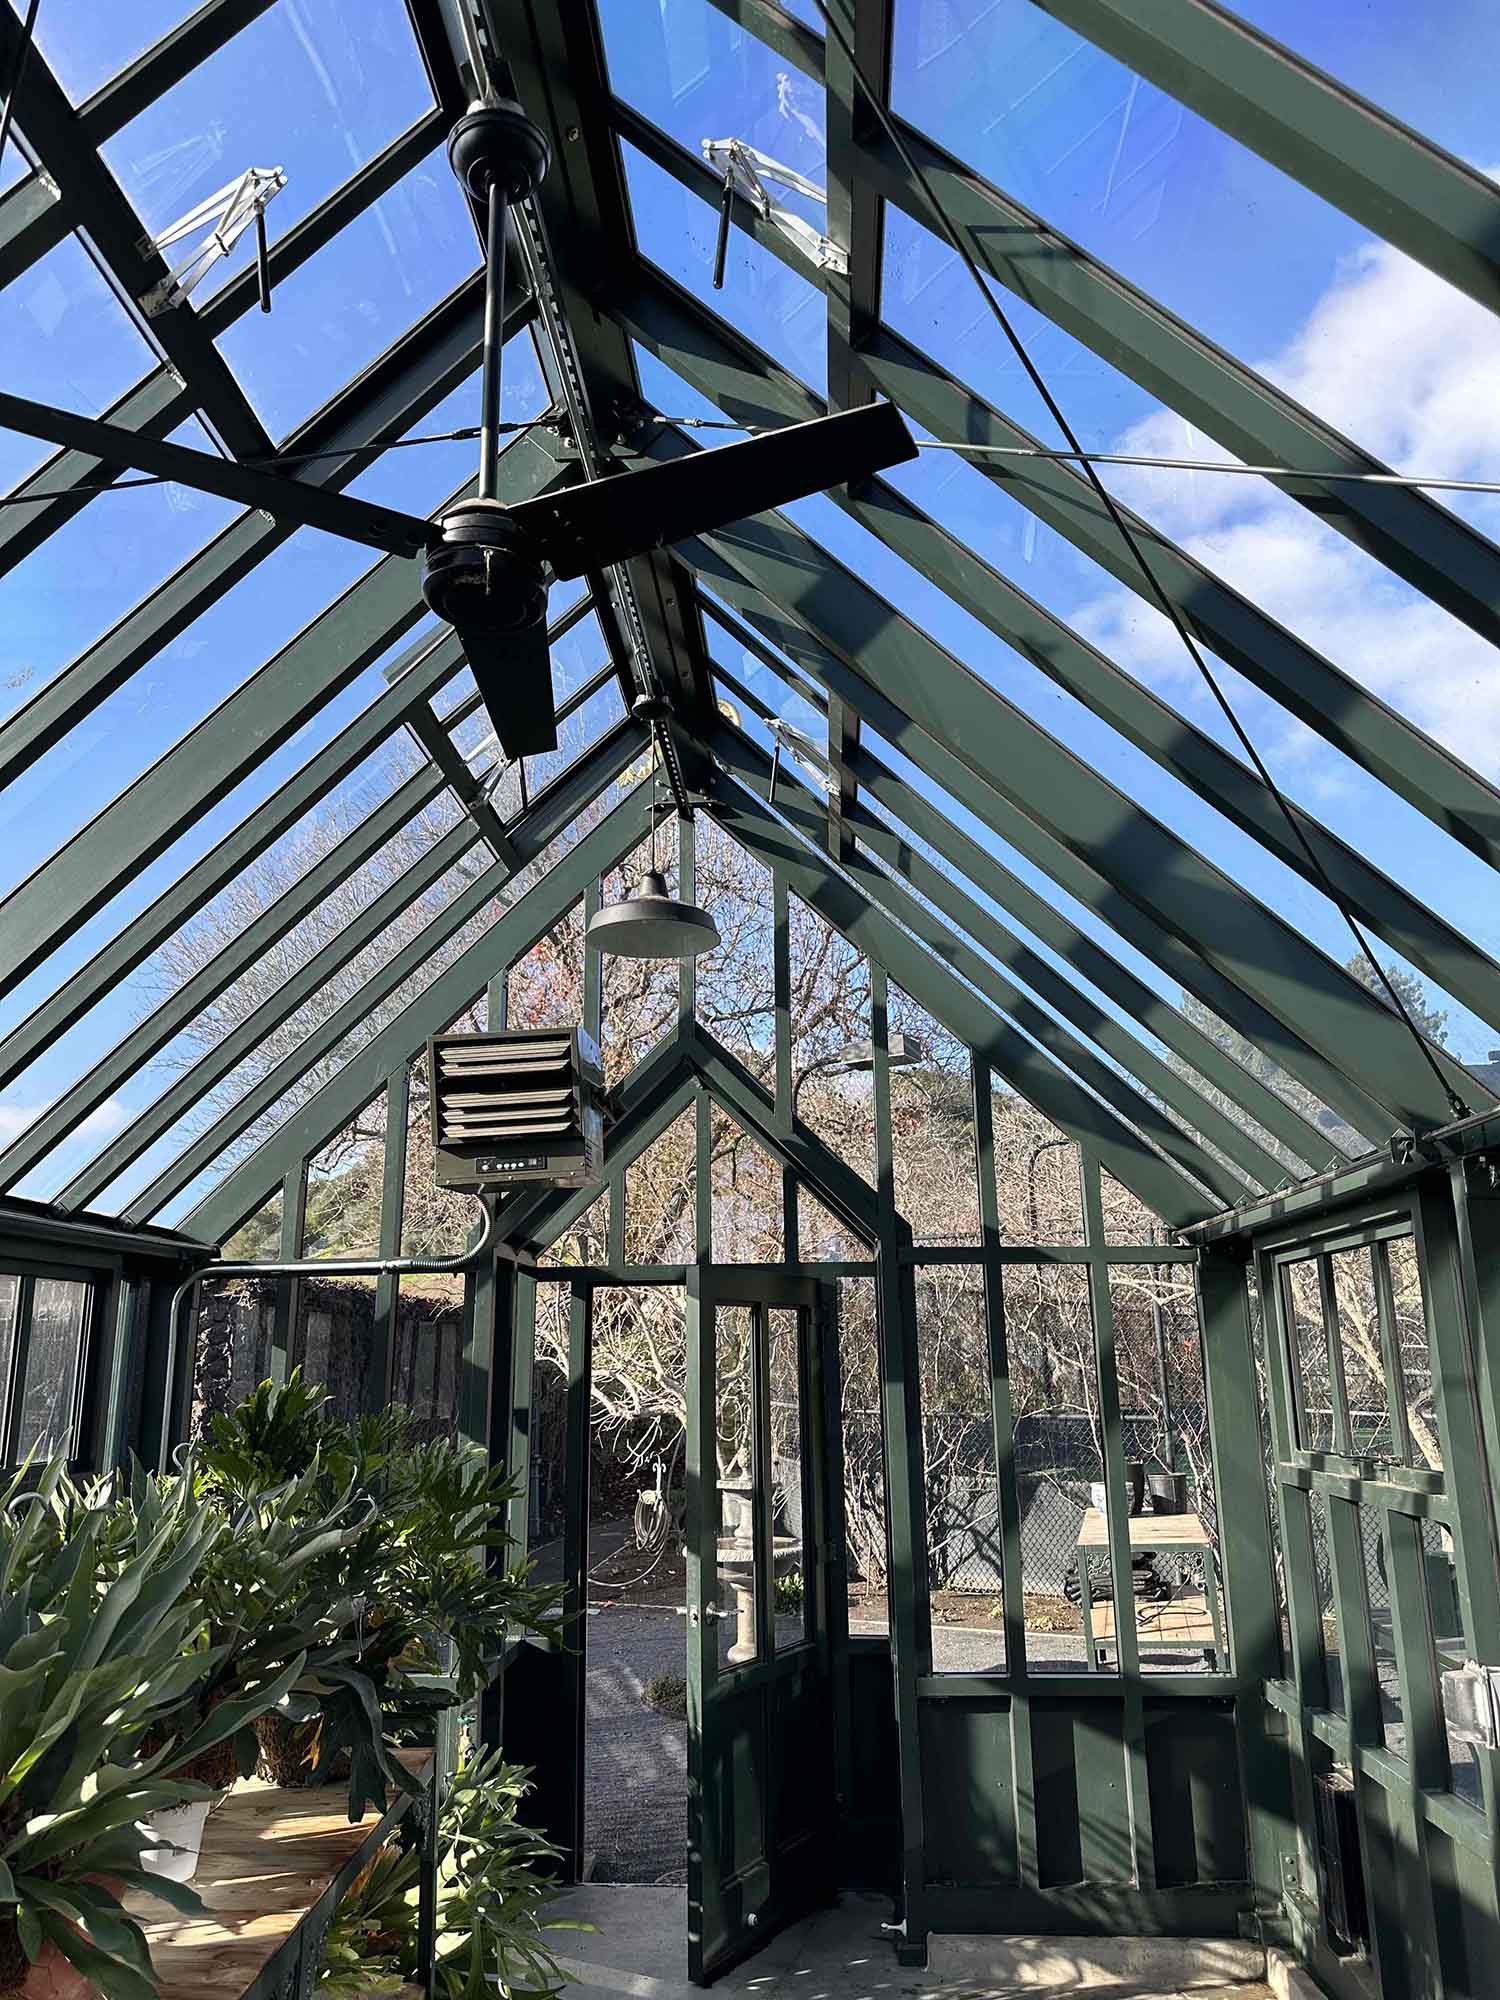 ClimatePro Installs 3M Window Film In A Yountville, CA Greenhouse